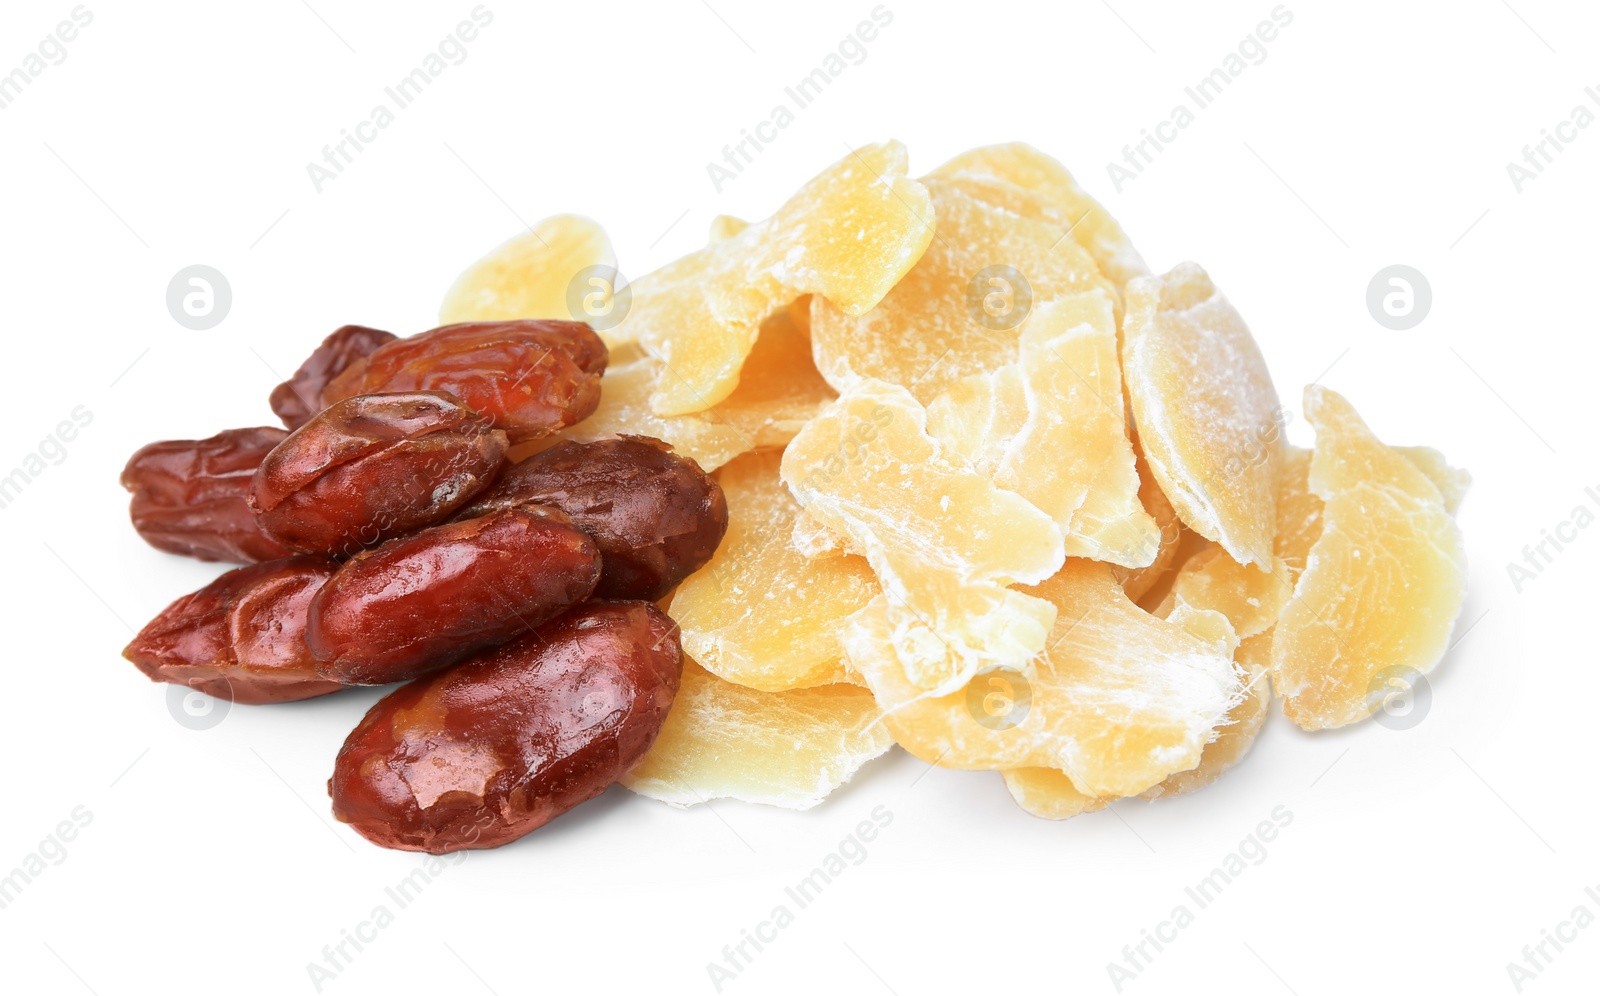 Photo of Pile of tasty dried pineapple and dates on white background. Healthy snack